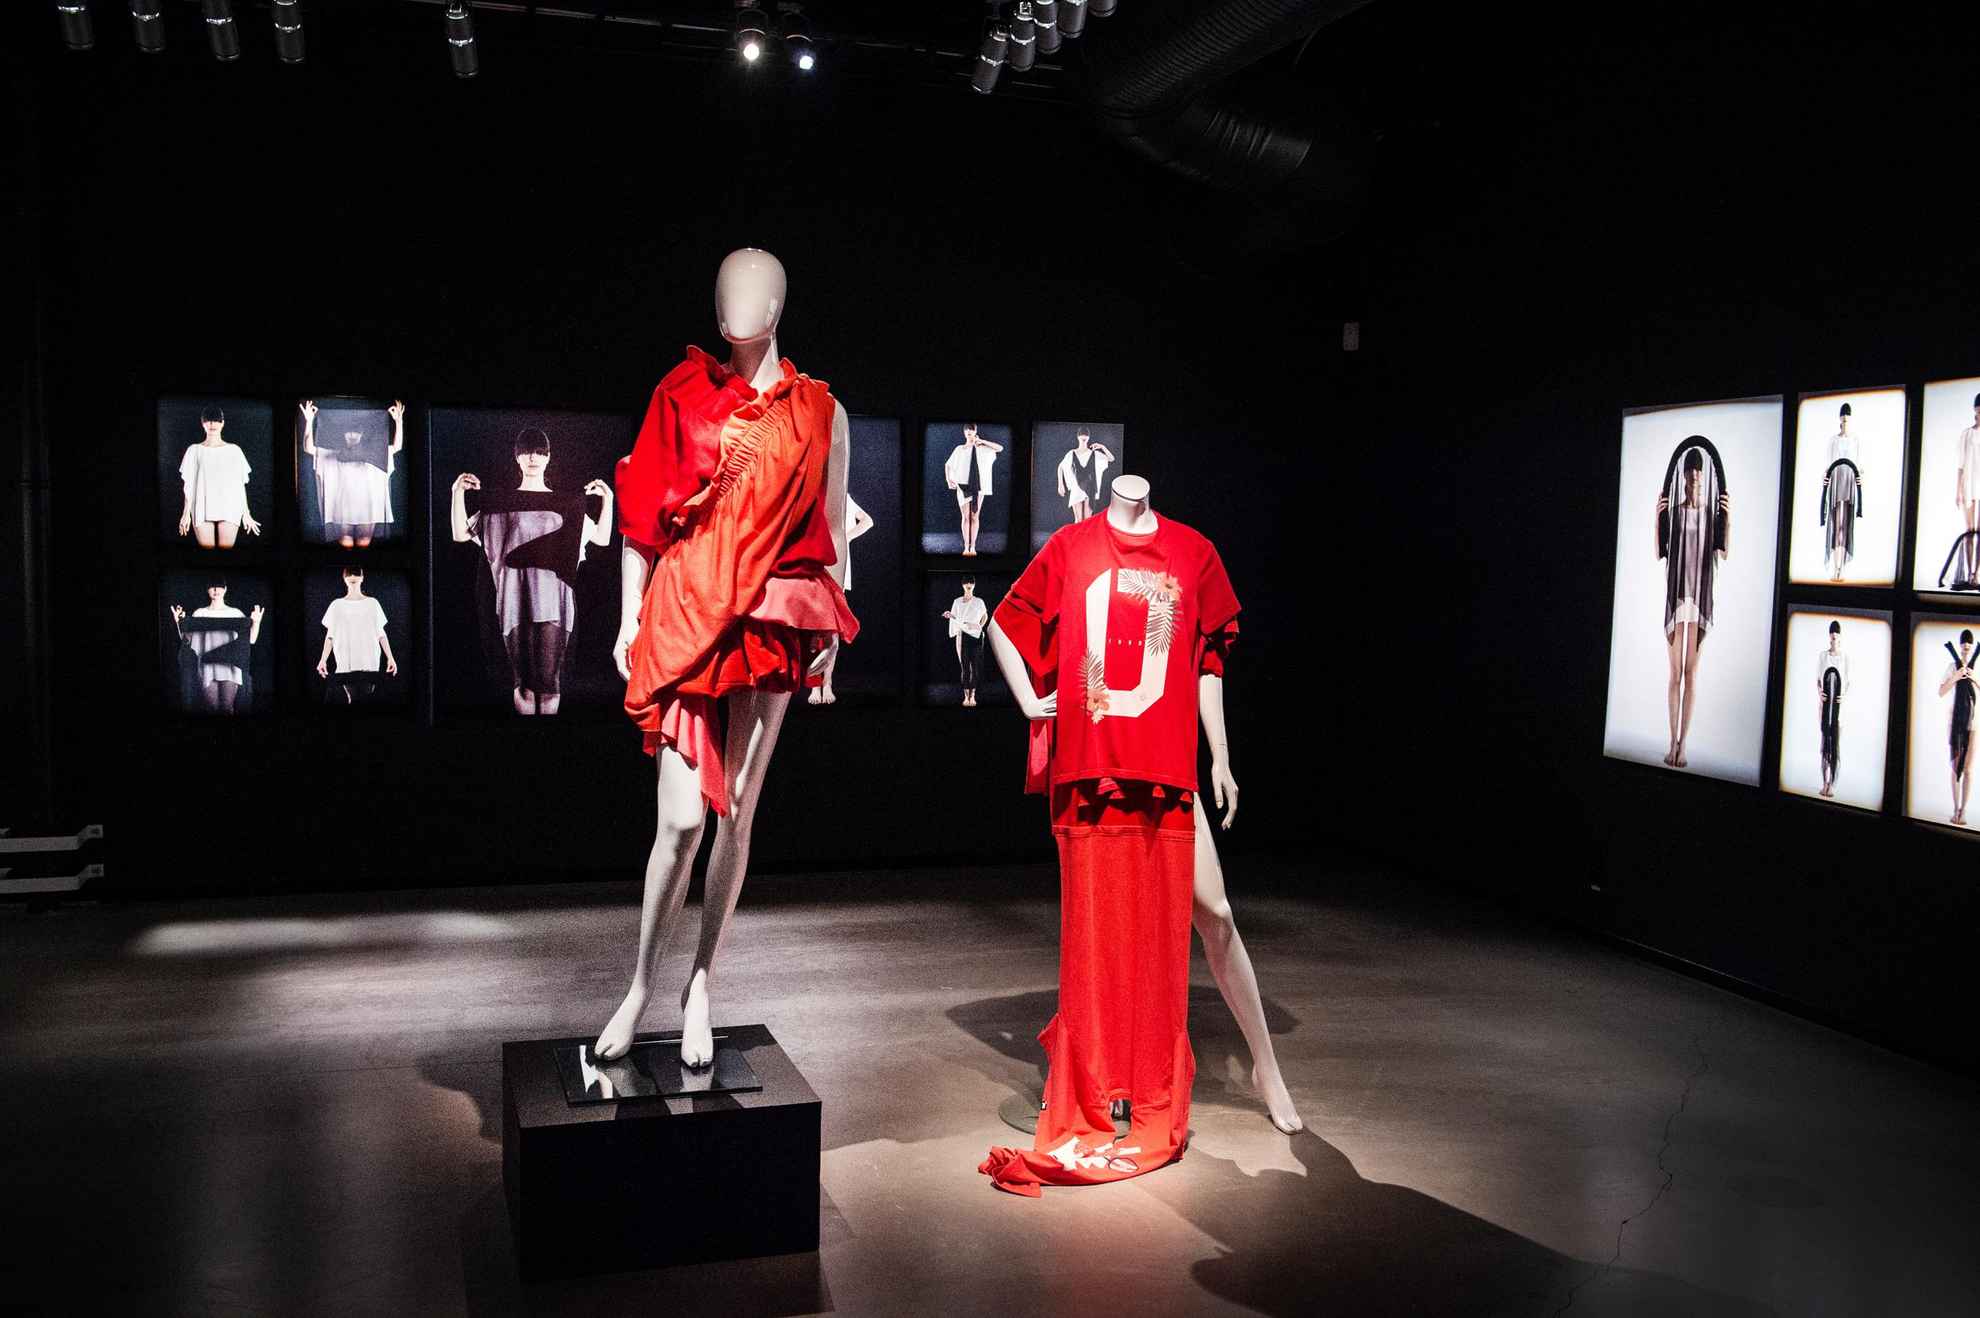 Mannequins dressed in red outfits, and large fashion photos hanging on the wall in a dark room.